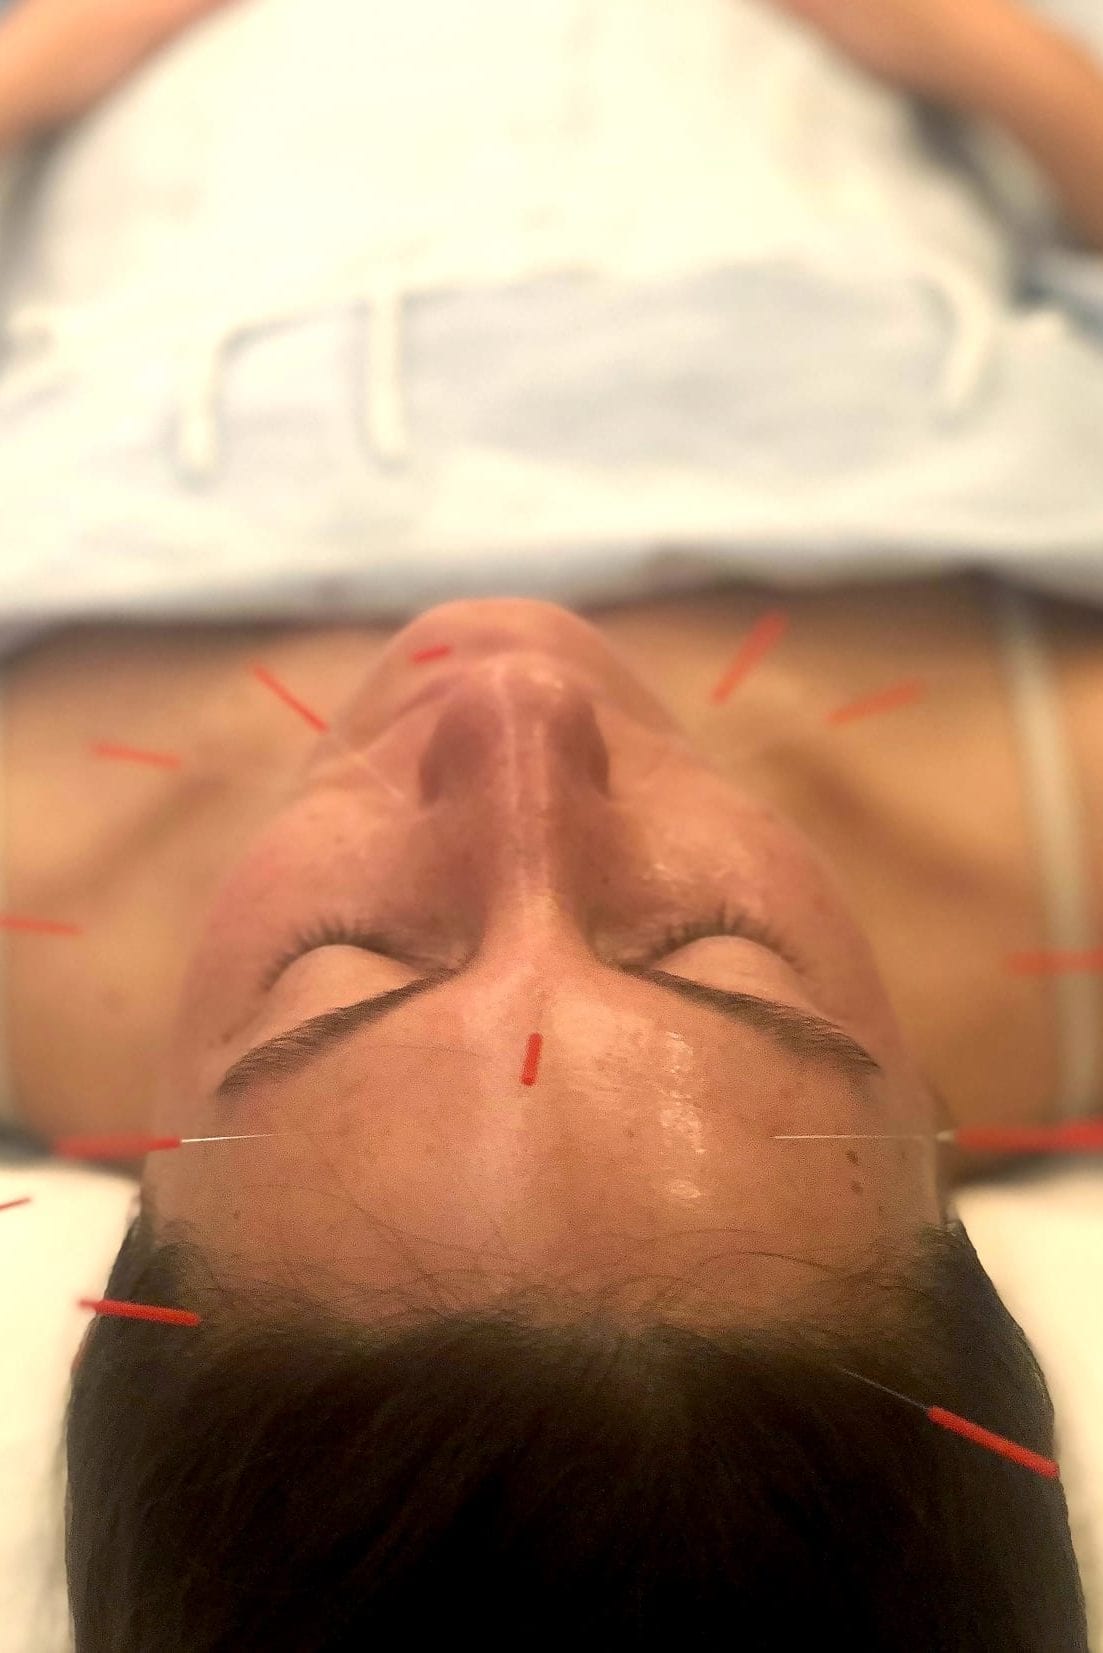 A woman gets an acupuncture facial.